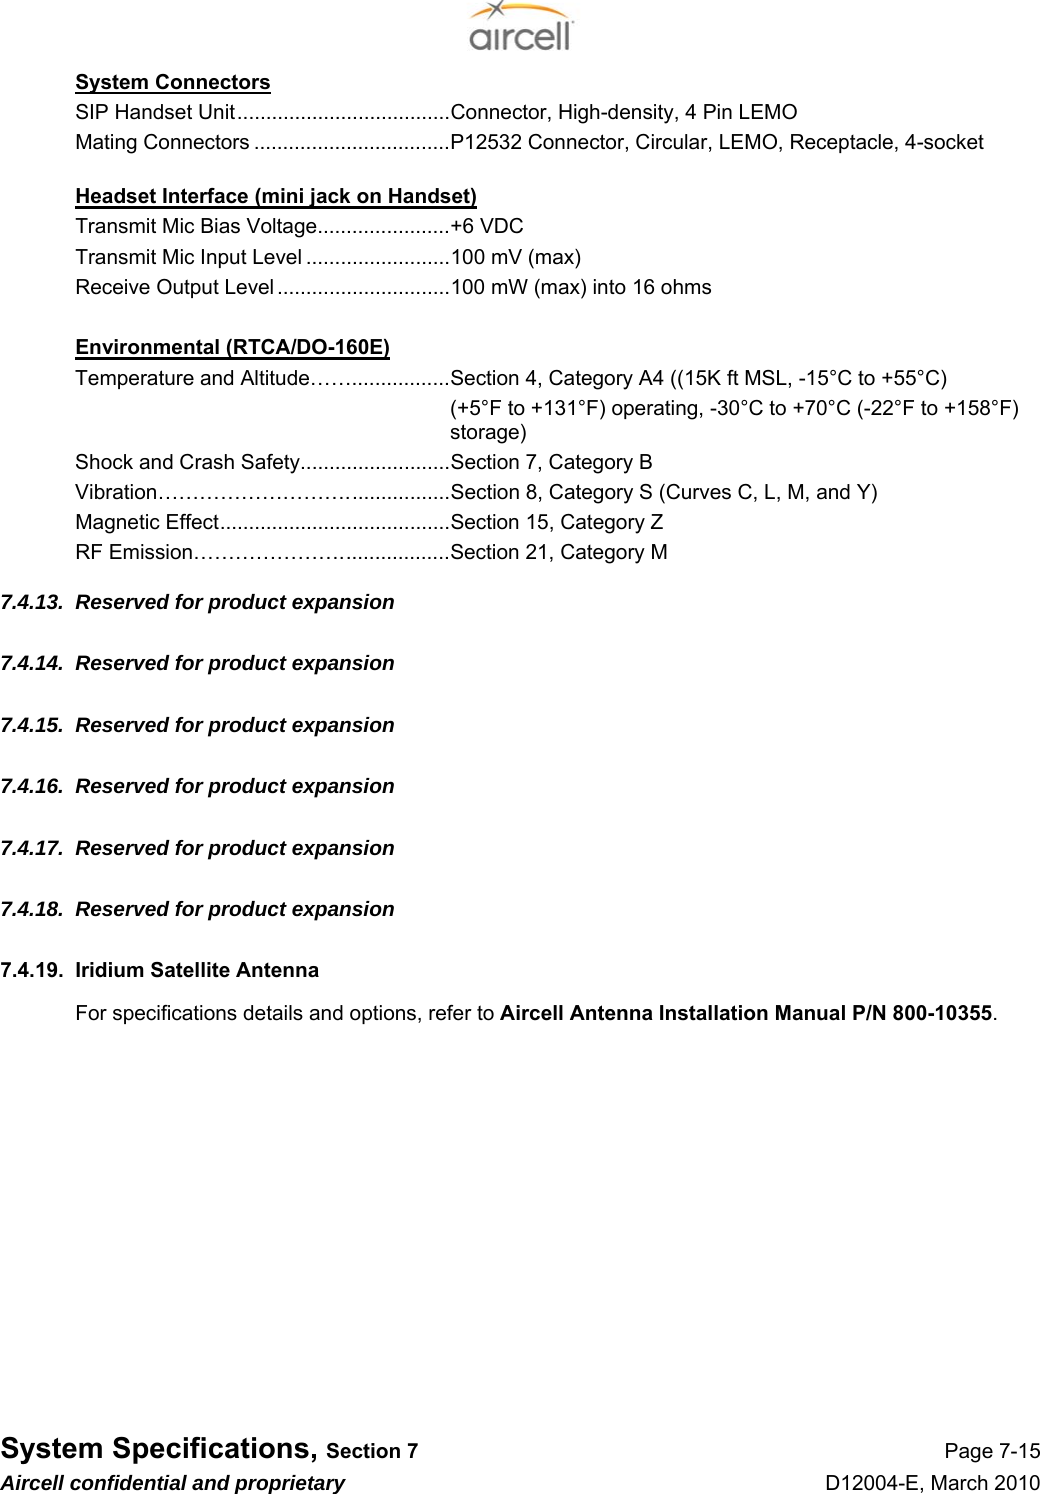  System Specifications, Section 7 Page 7-15 Aircell confidential and proprietary D12004-E, March 2010 System Connectors SIP Handset Unit.....................................Connector, High-density, 4 Pin LEMO Mating Connectors ..................................P12532 Connector, Circular, LEMO, Receptacle, 4-socket  Headset Interface (mini jack on Handset) Transmit Mic Bias Voltage.......................+6 VDC Transmit Mic Input Level .........................100 mV (max) Receive Output Level ..............................100 mW (max) into 16 ohms  Environmental (RTCA/DO-160E) Temperature and Altitude…….................Section 4, Category A4 ((15K ft MSL, -15°C to +55°C) (+5°F to +131°F) operating, -30°C to +70°C (-22°F to +158°F) storage) Shock and Crash Safety..........................Section 7, Category B Vibration………………………..................Section 8, Category S (Curves C, L, M, and Y) Magnetic Effect........................................Section 15, Category Z RF Emission…………………...................Section 21, Category M 7.4.13.  Reserved for product expansion 7.4.14.  Reserved for product expansion 7.4.15.  Reserved for product expansion 7.4.16.  Reserved for product expansion 7.4.17.  Reserved for product expansion 7.4.18.  Reserved for product expansion 7.4.19.  Iridium Satellite Antenna For specifications details and options, refer to Aircell Antenna Installation Manual P/N 800-10355. 